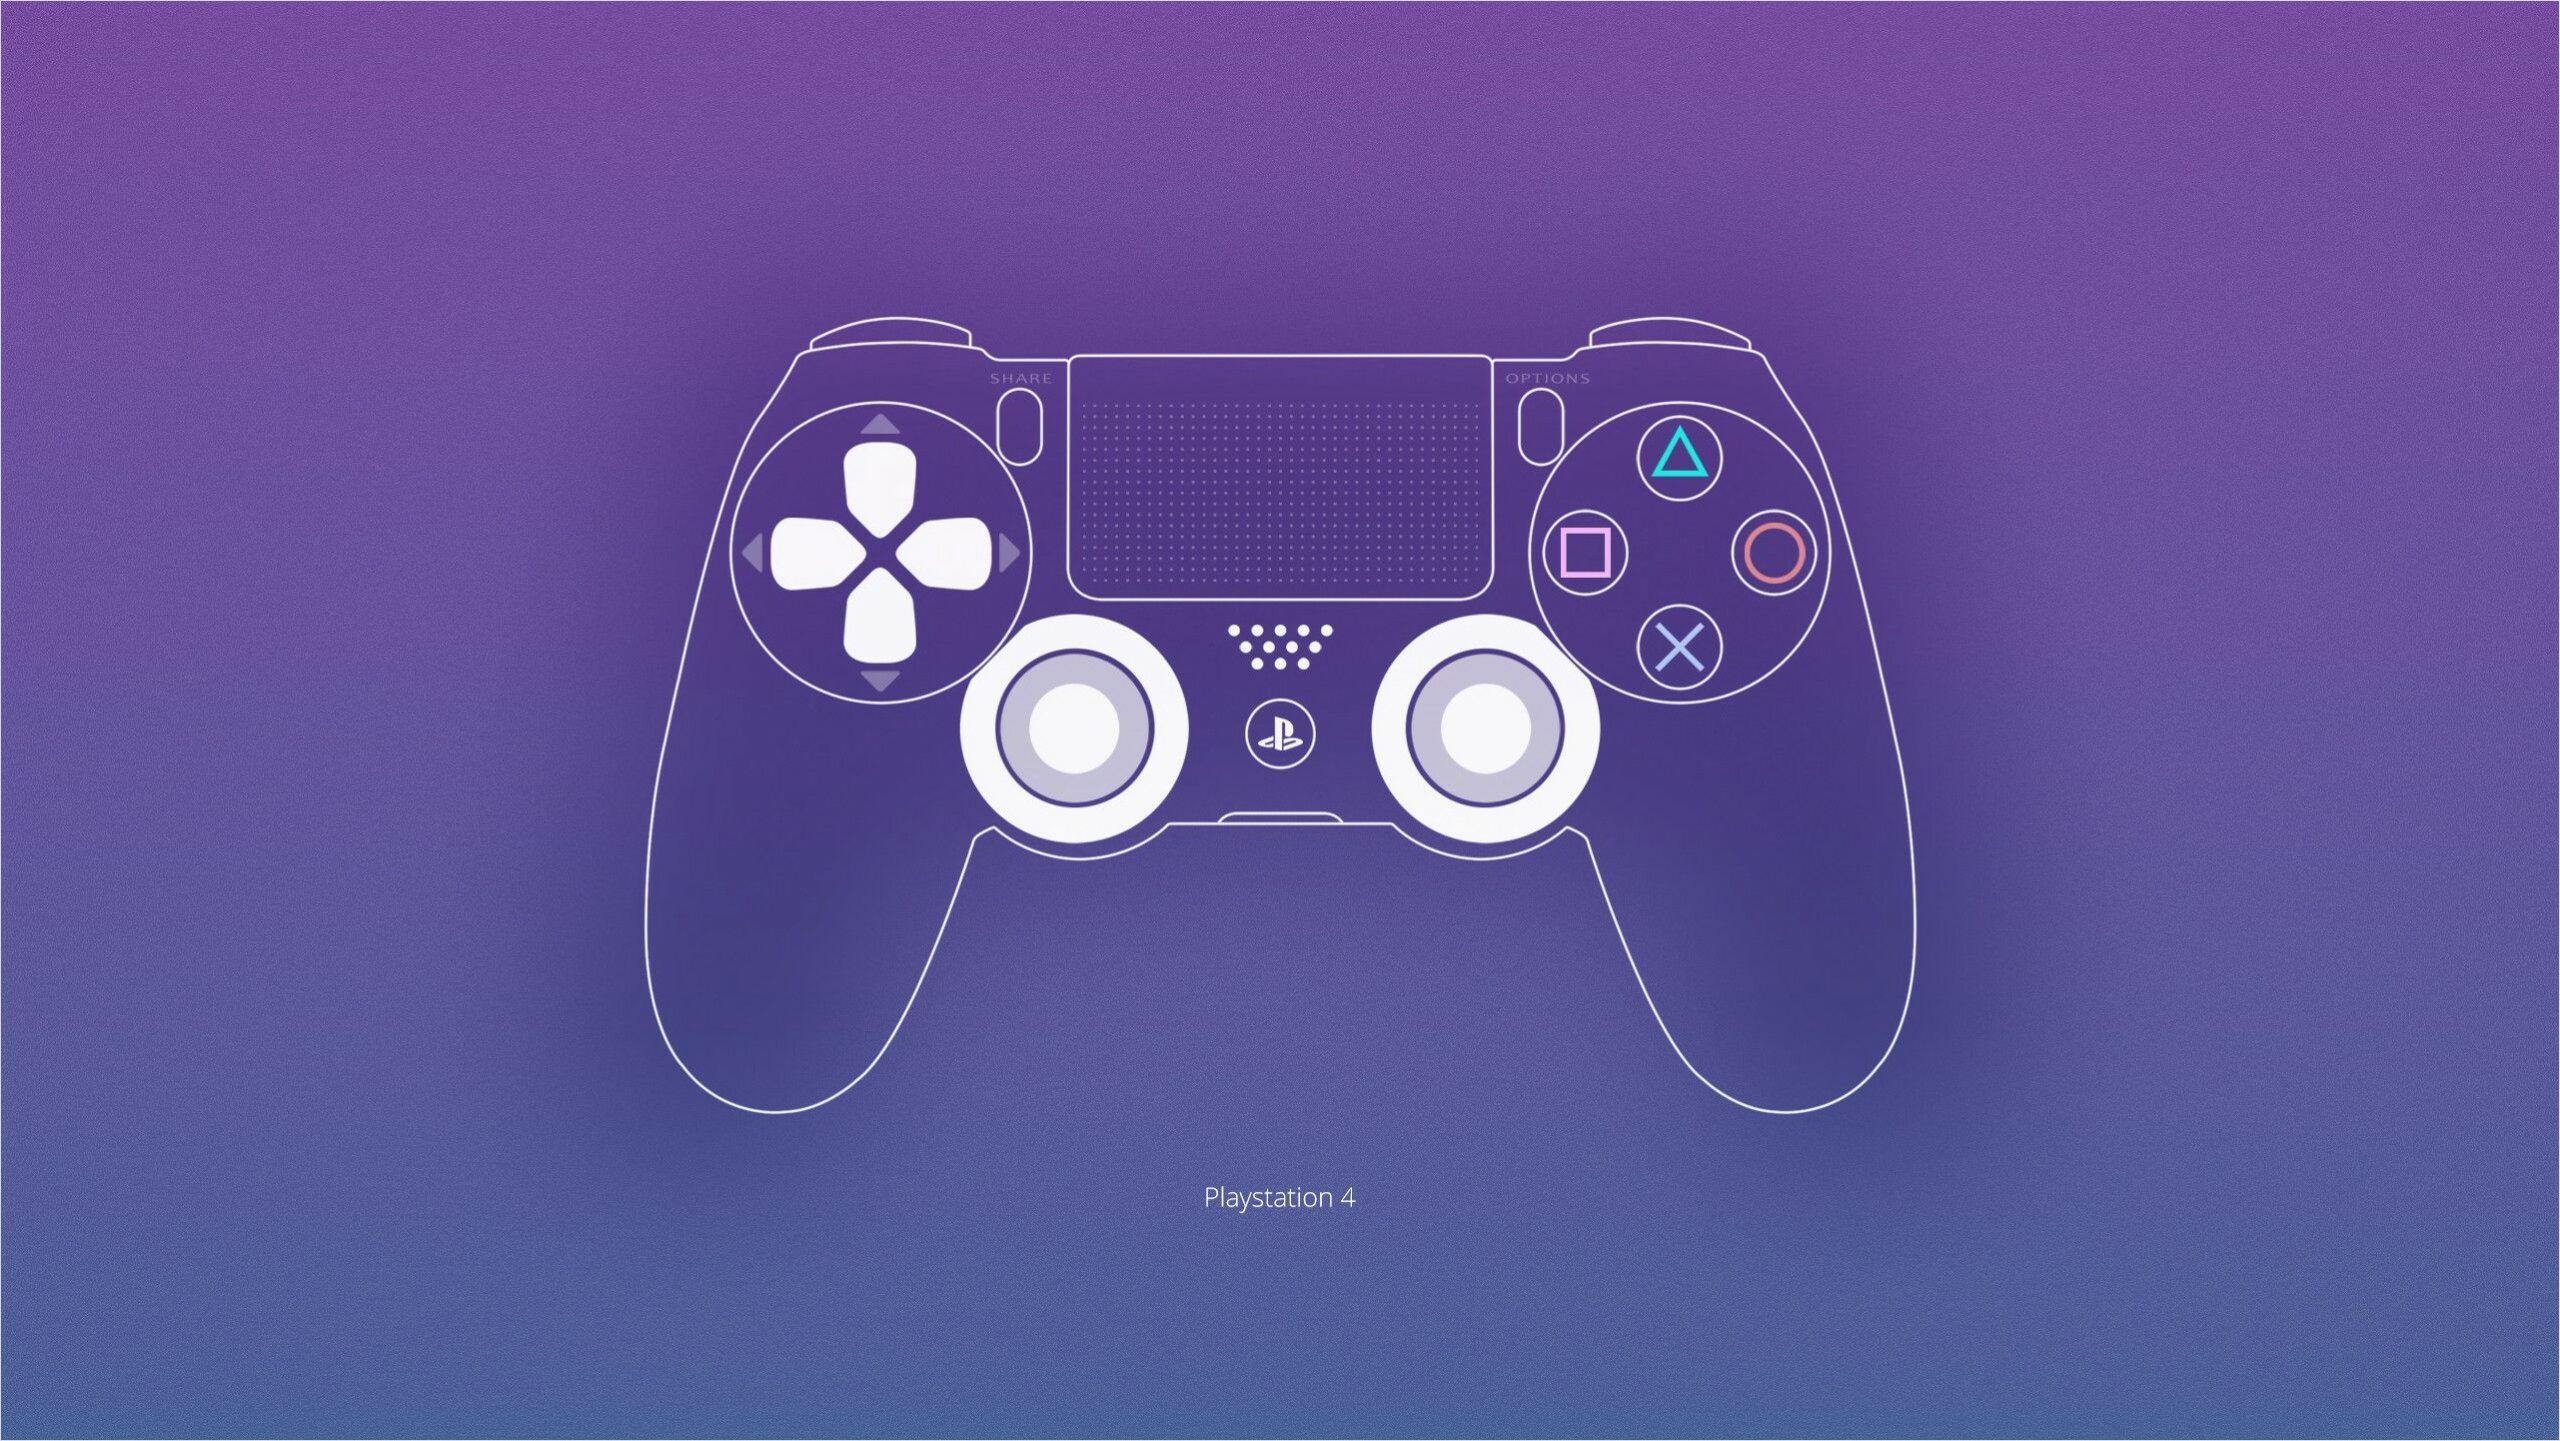 Ps4 Controller Wallpaper 4k. Ps4 games, Video game controller, Playstation controller